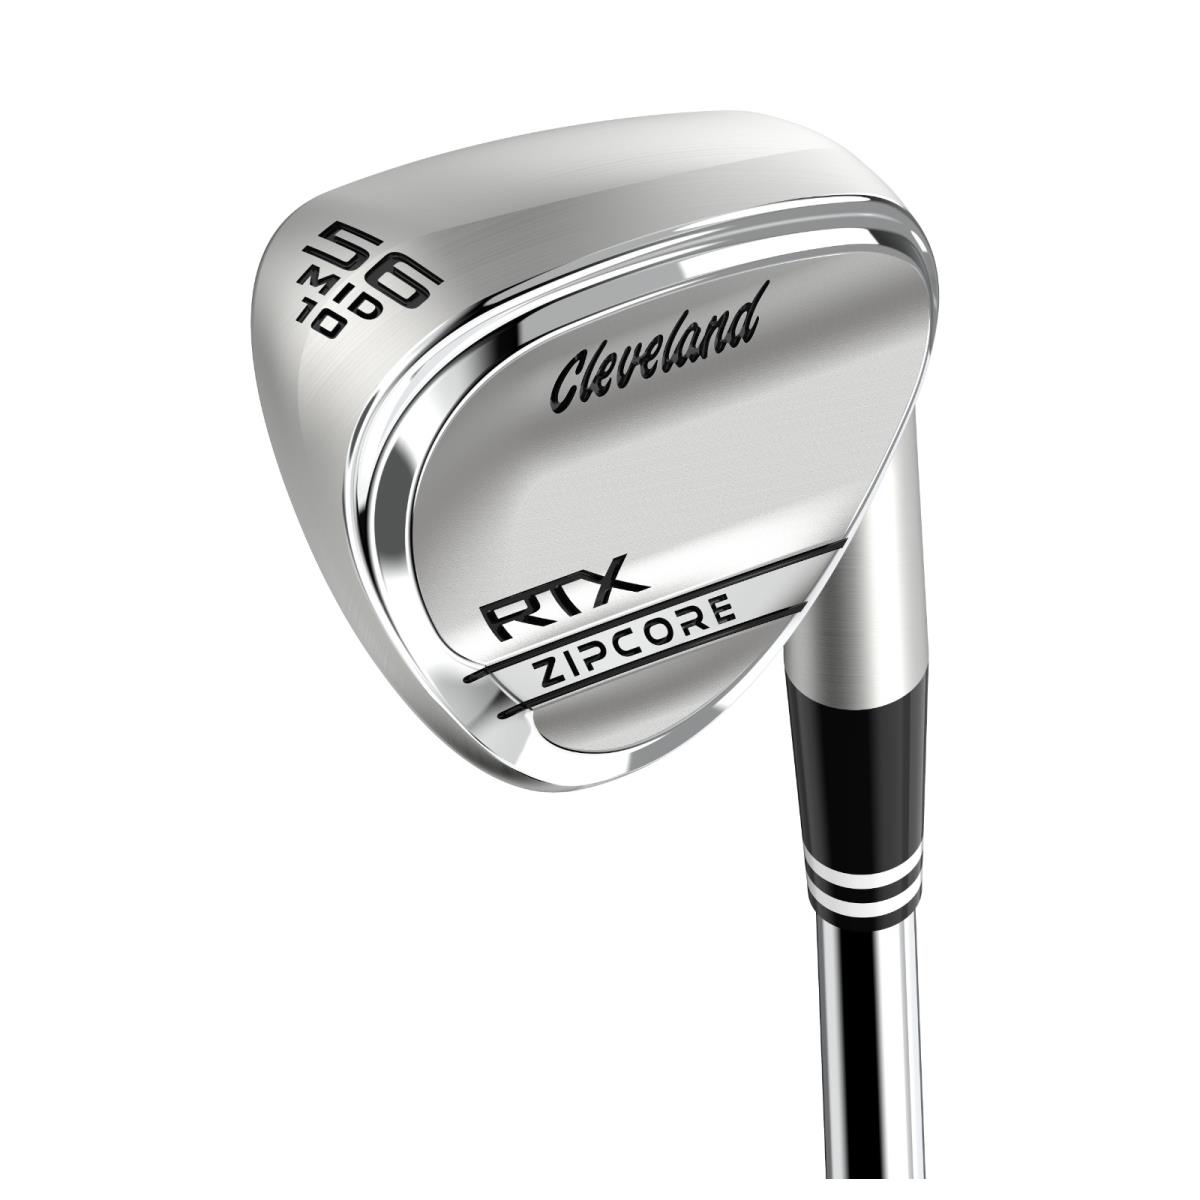 Cleveland Rtx Zipcore Wedge - Dynamic Gold Spinner Tour Issue